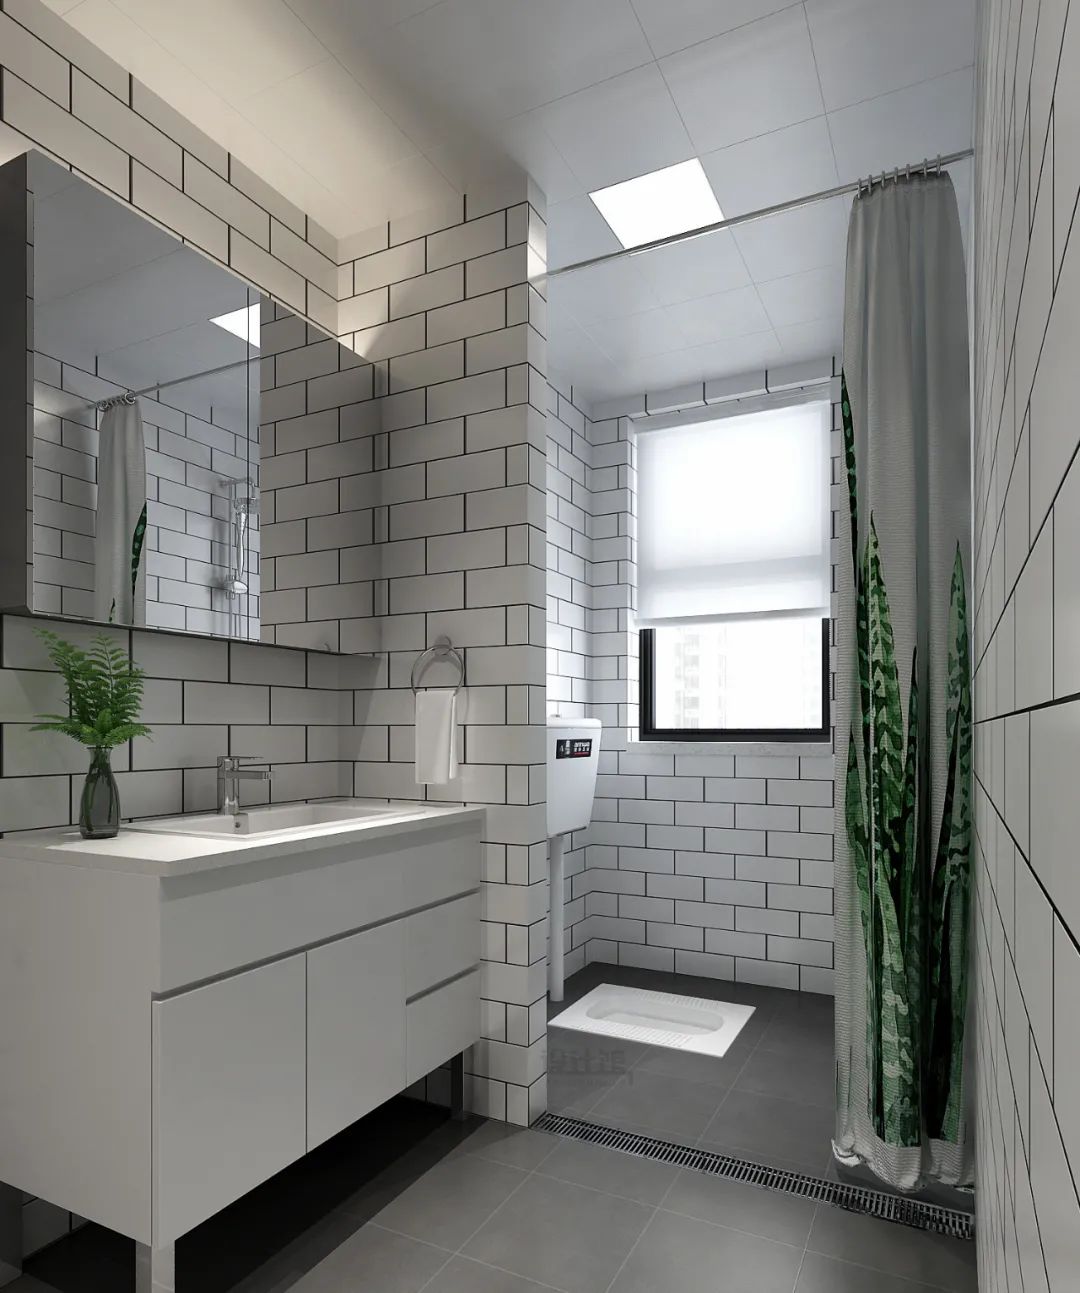 How to design a small bathroom with right bathroom furniture and right approach